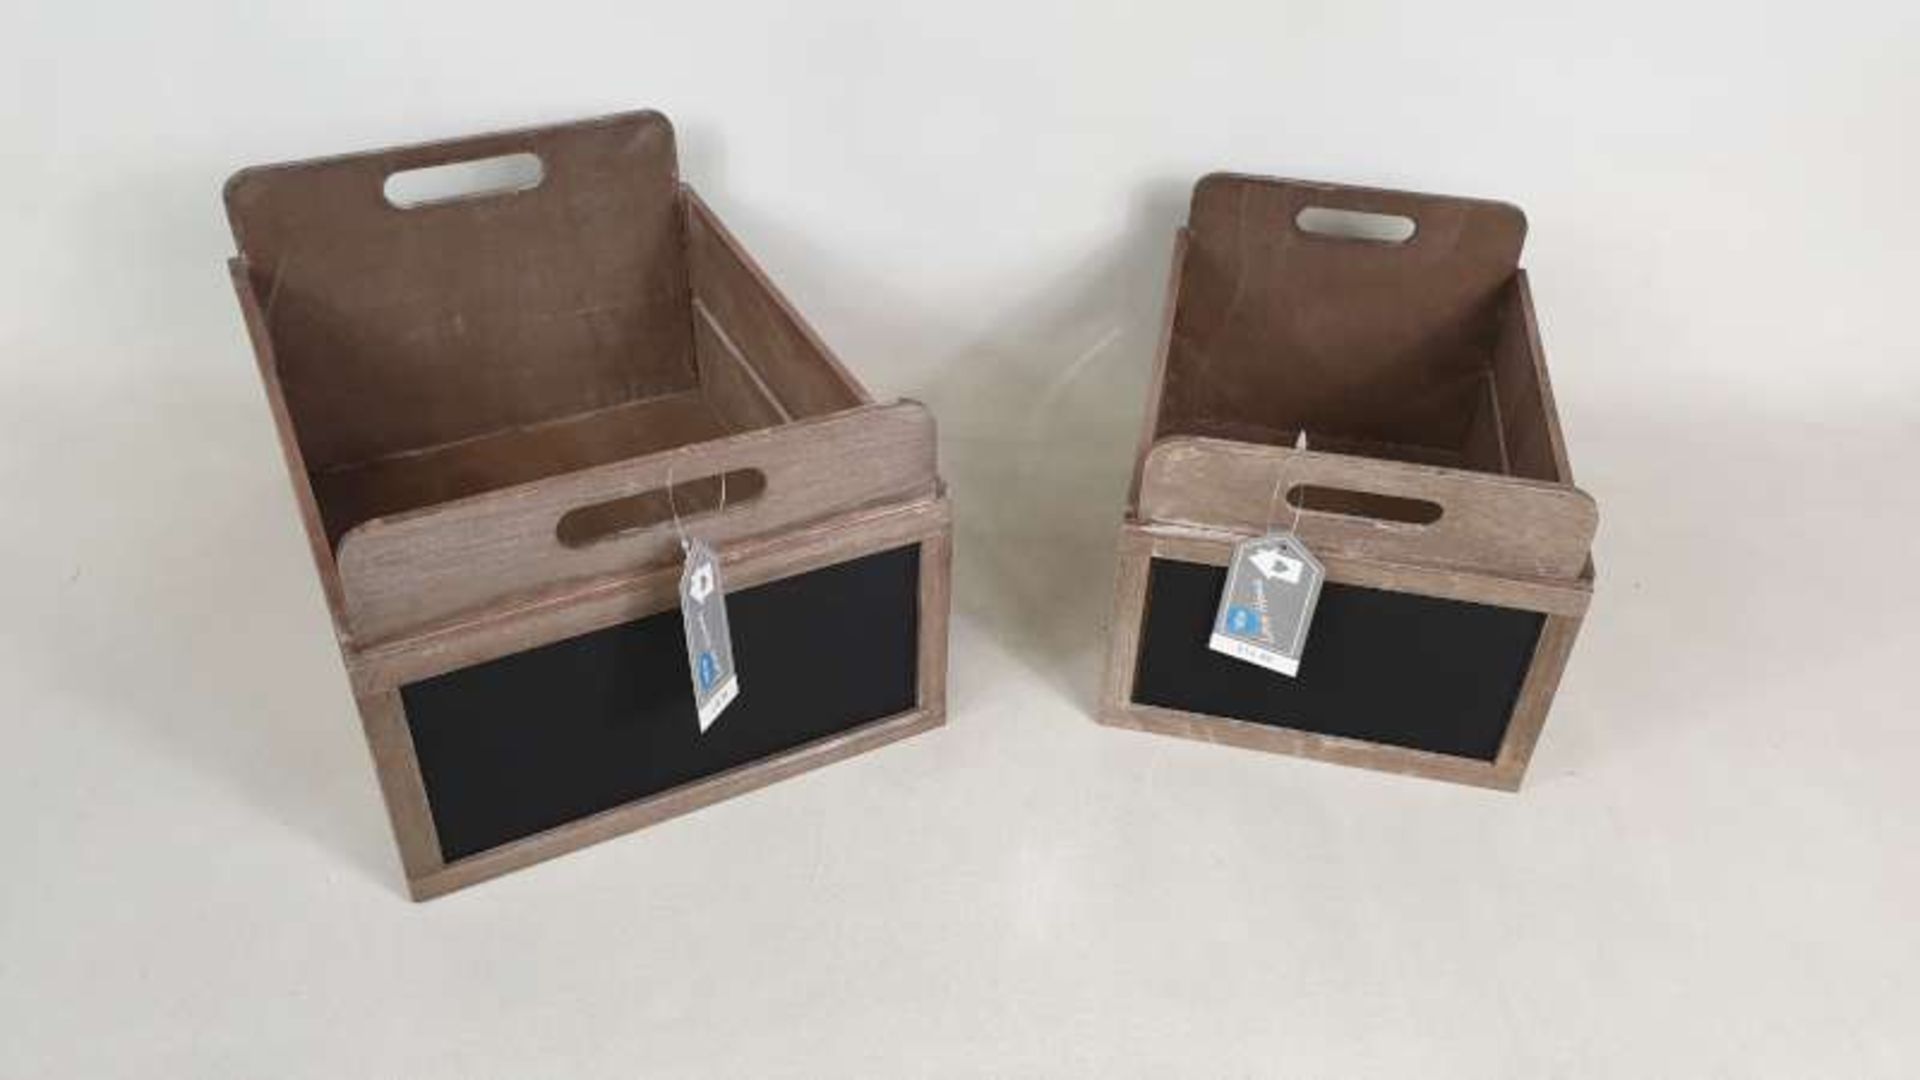 10 X SETS OF 2 LARGE / MEDIUM CRATES WITH CHALKBOARD IN 10 BOXES RRP £28.99 EACH SET